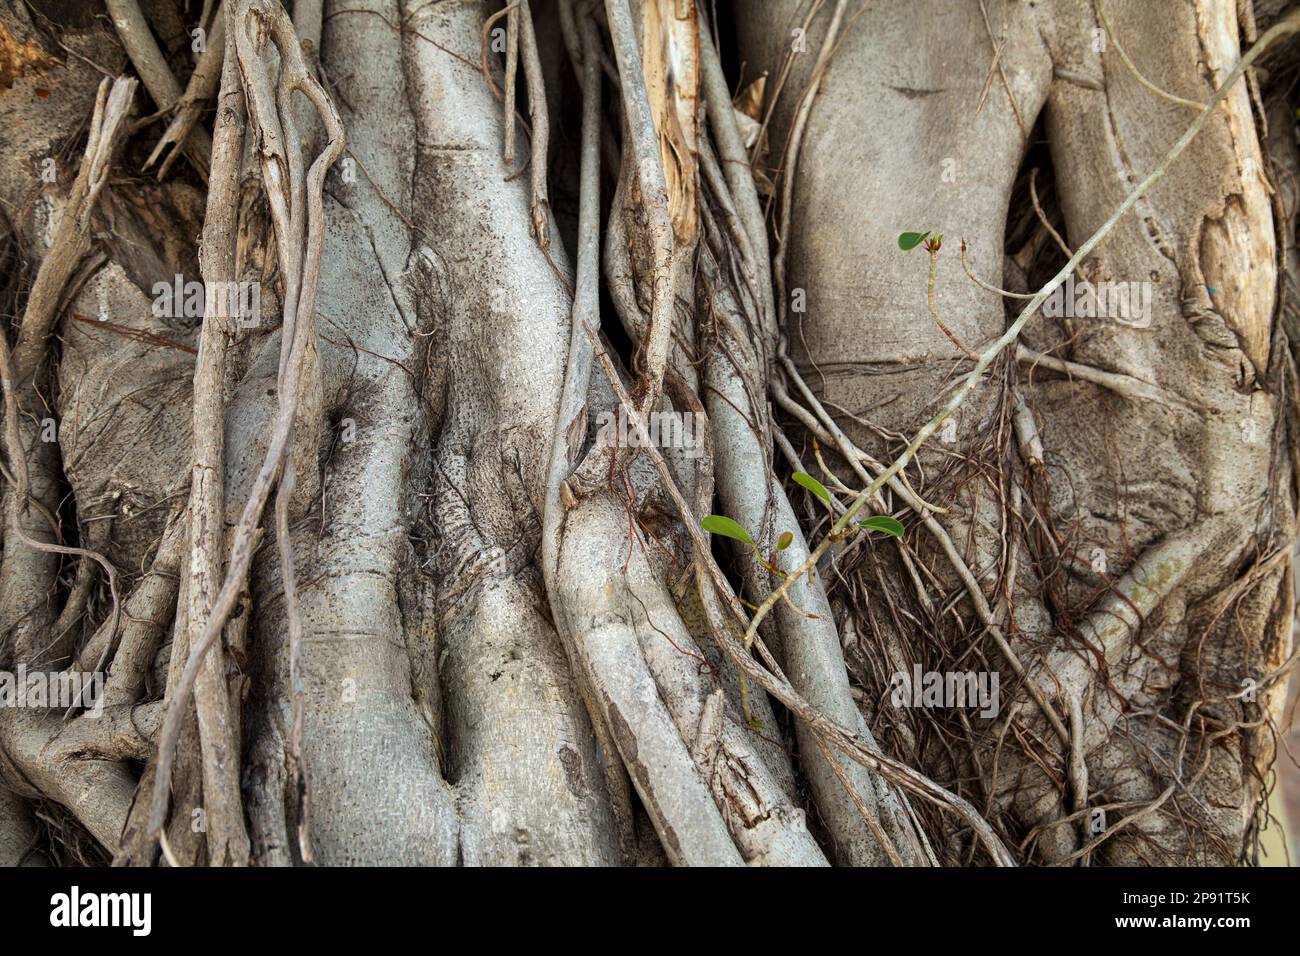 Banyan trees trunks with hanging roots close-up. Old trees tangled roots textured background Stock Photo